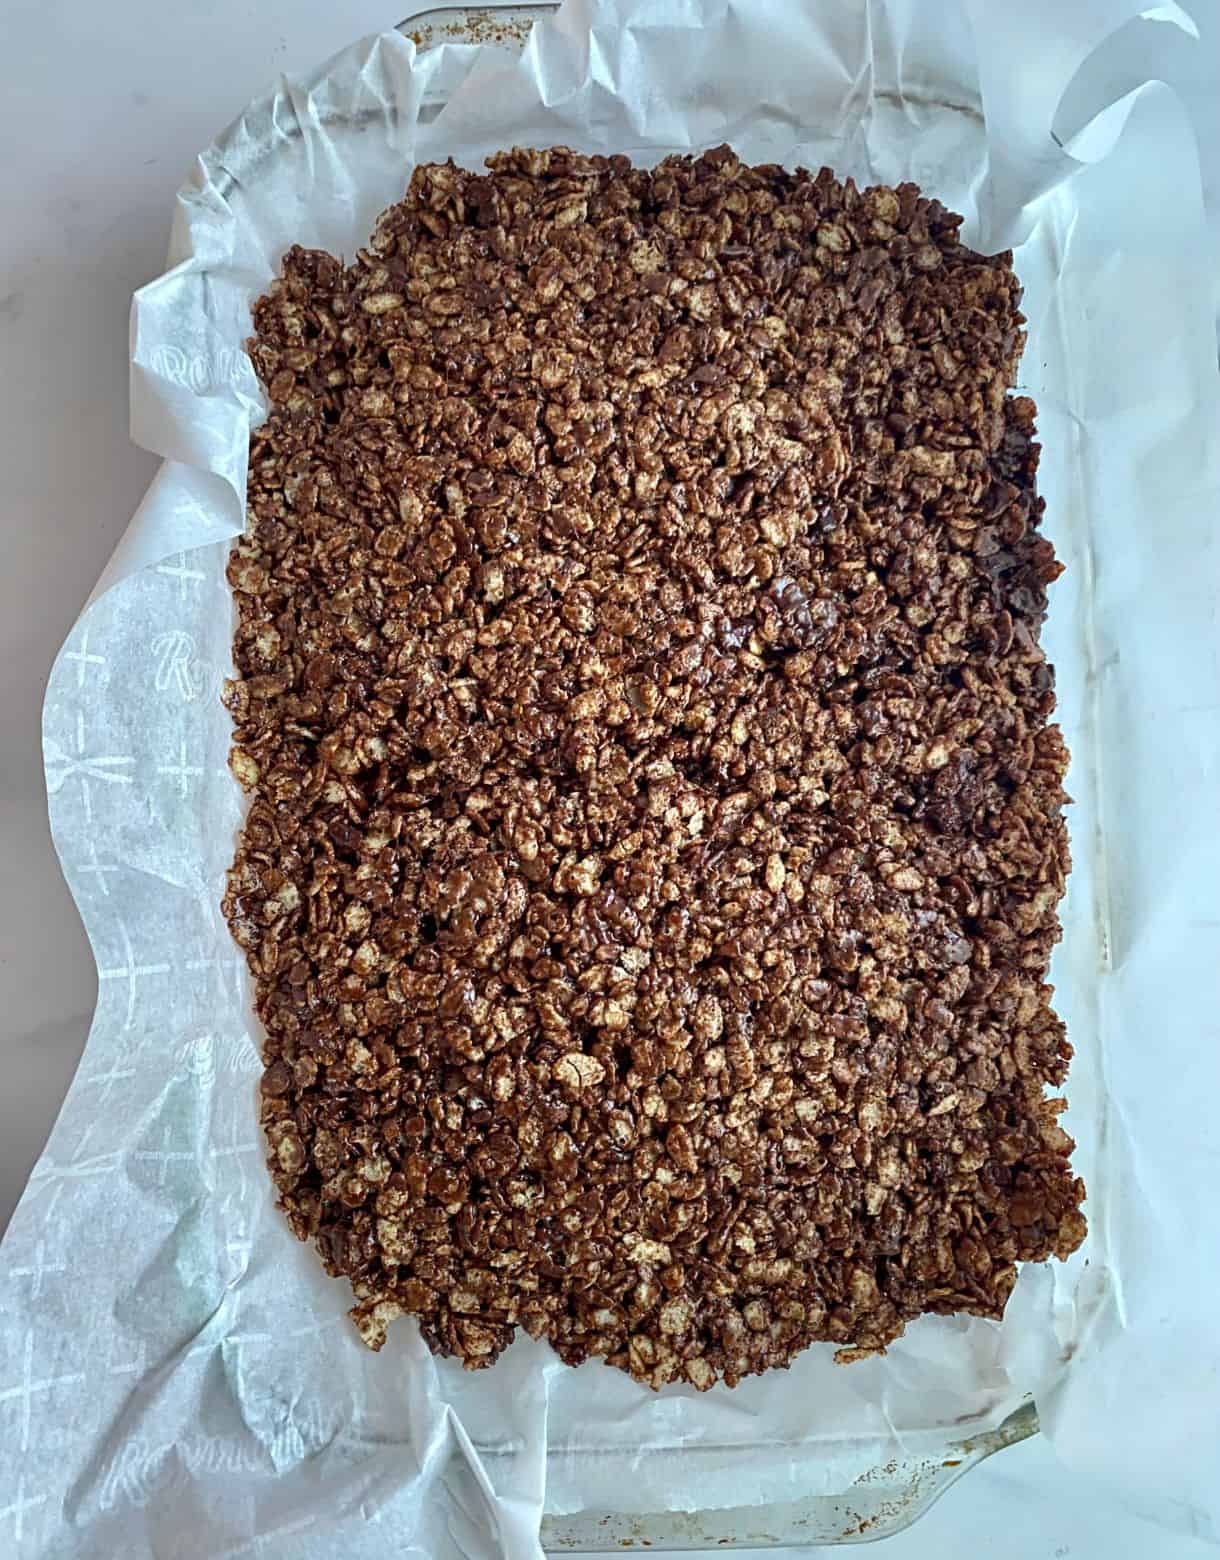 Chocolate Rice Krispie Treats spread into a pan lined with parchment paper.